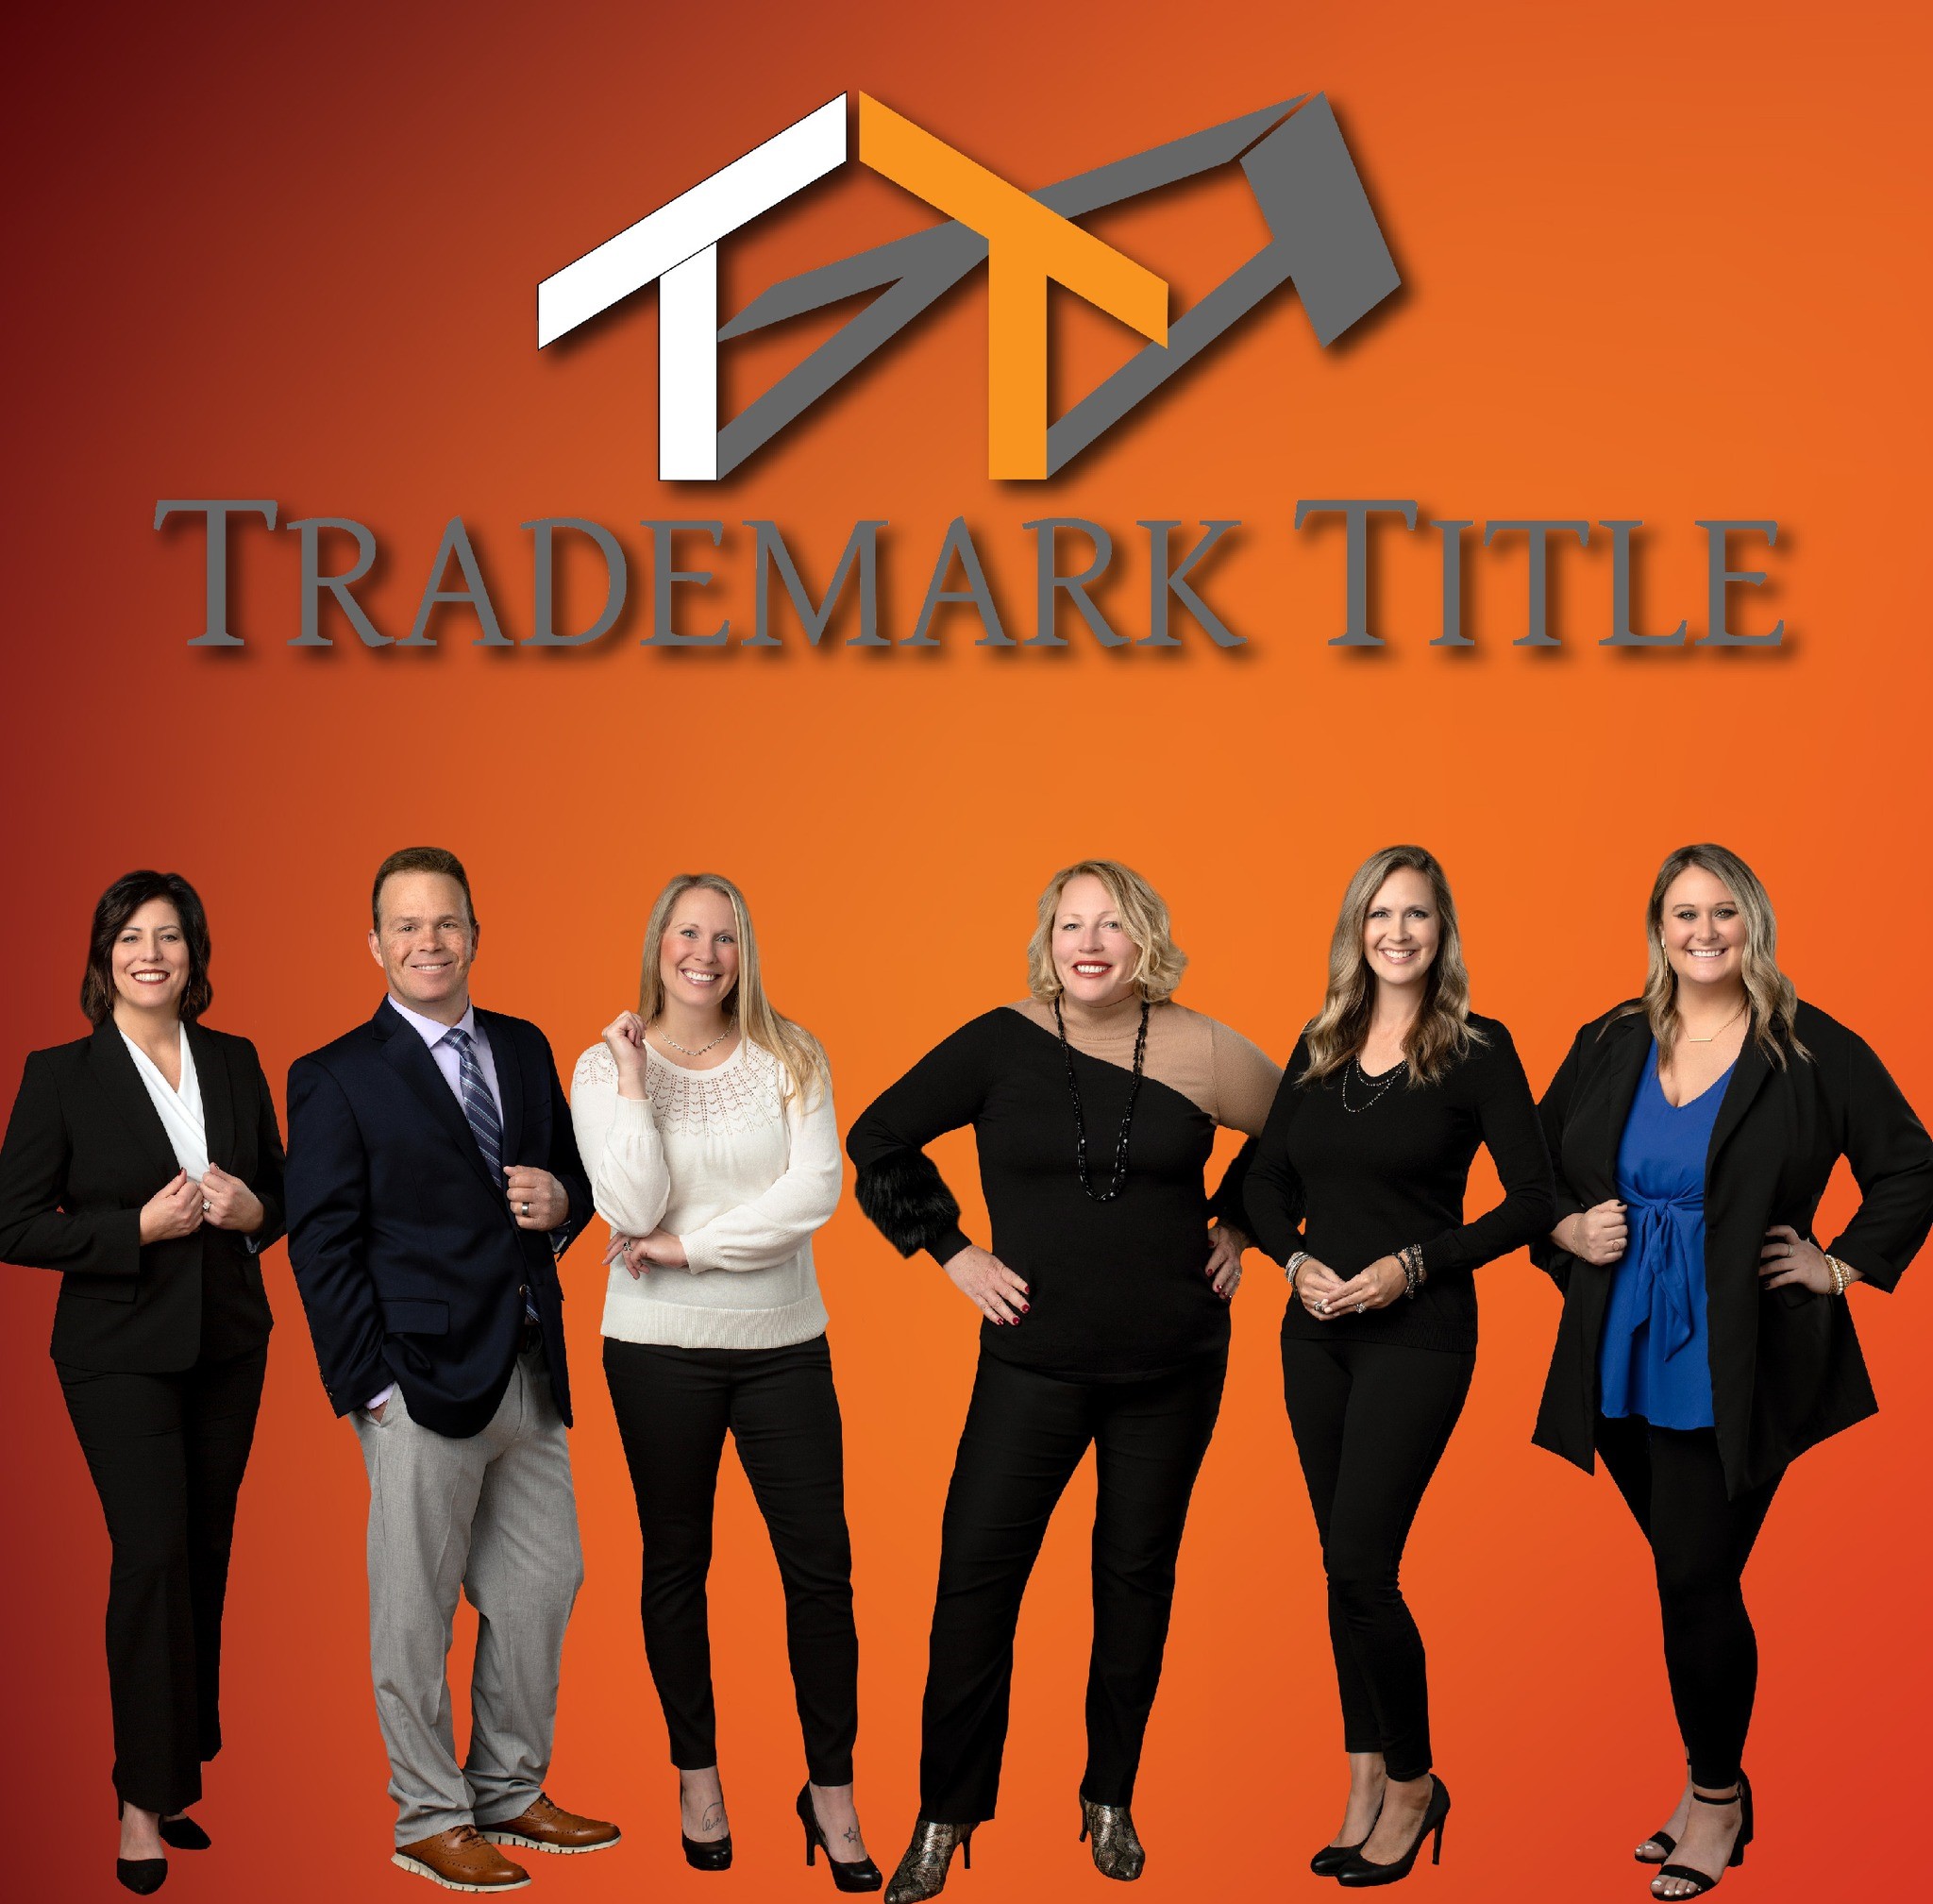 Trademark Title: Providing Exceptional Title Handling, Real Estate Closing Services & So Much More